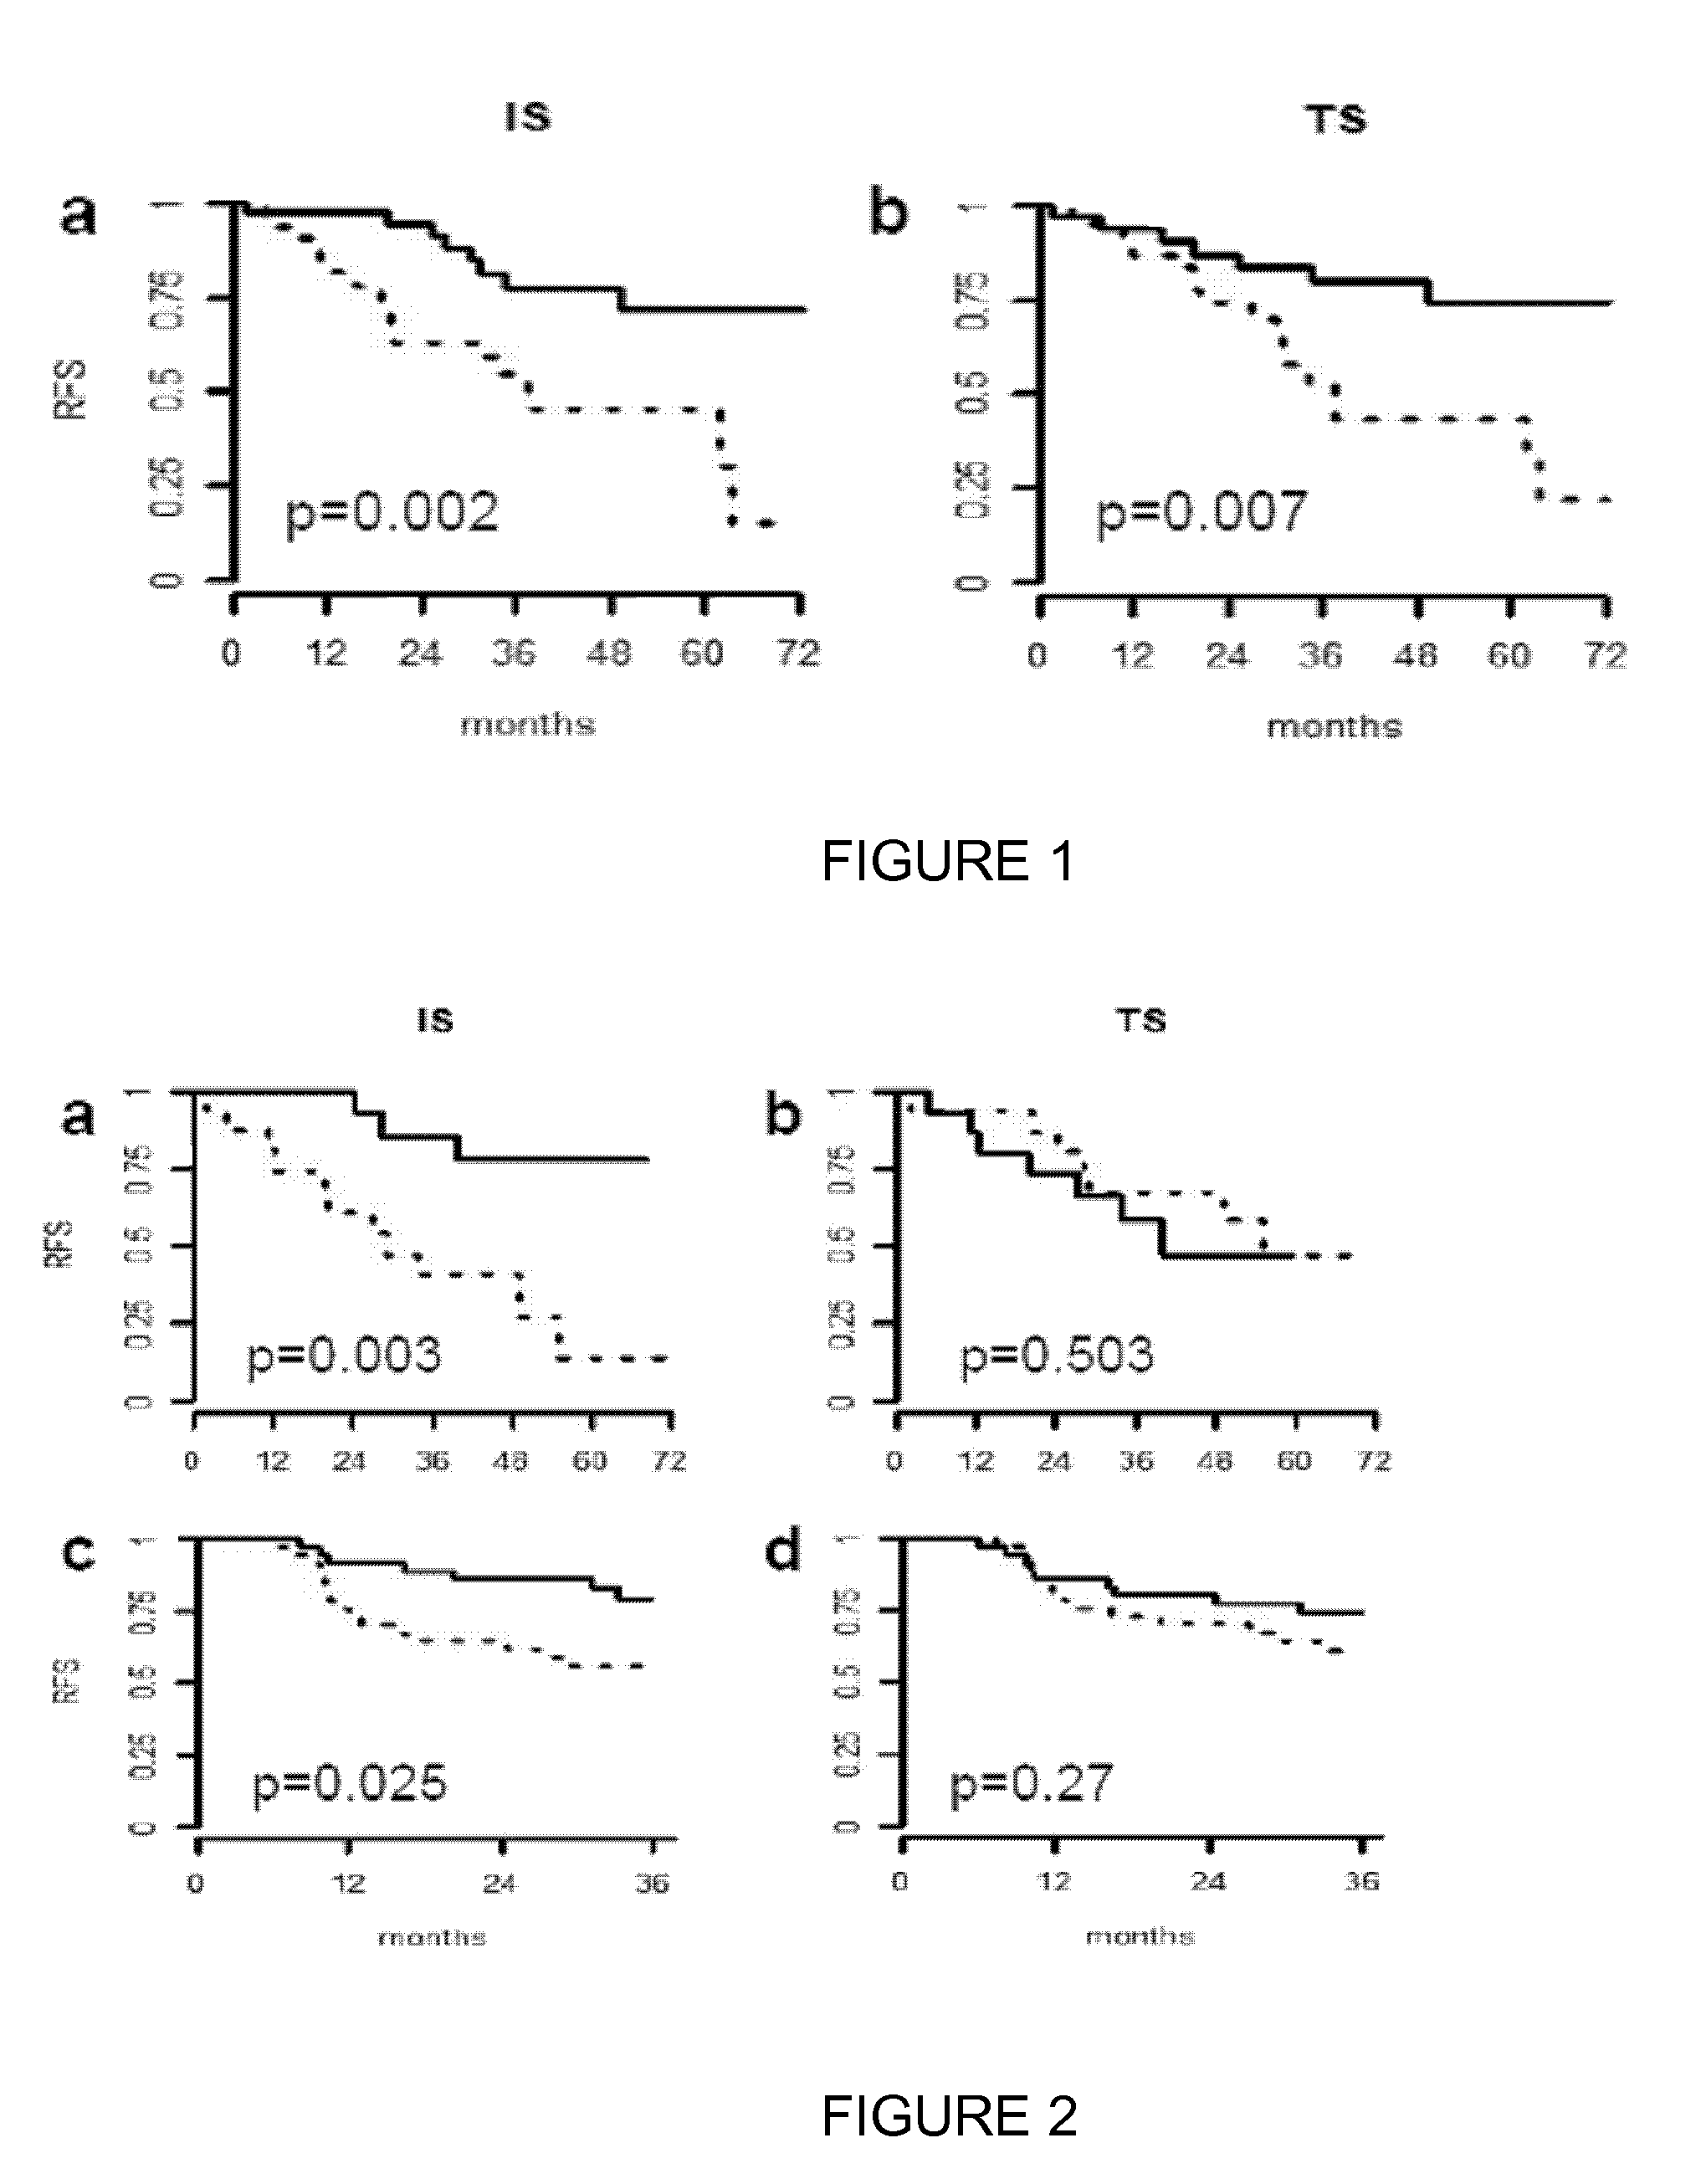 Method for predicting clinical outcome of patients with non-small cell lung carcinoma